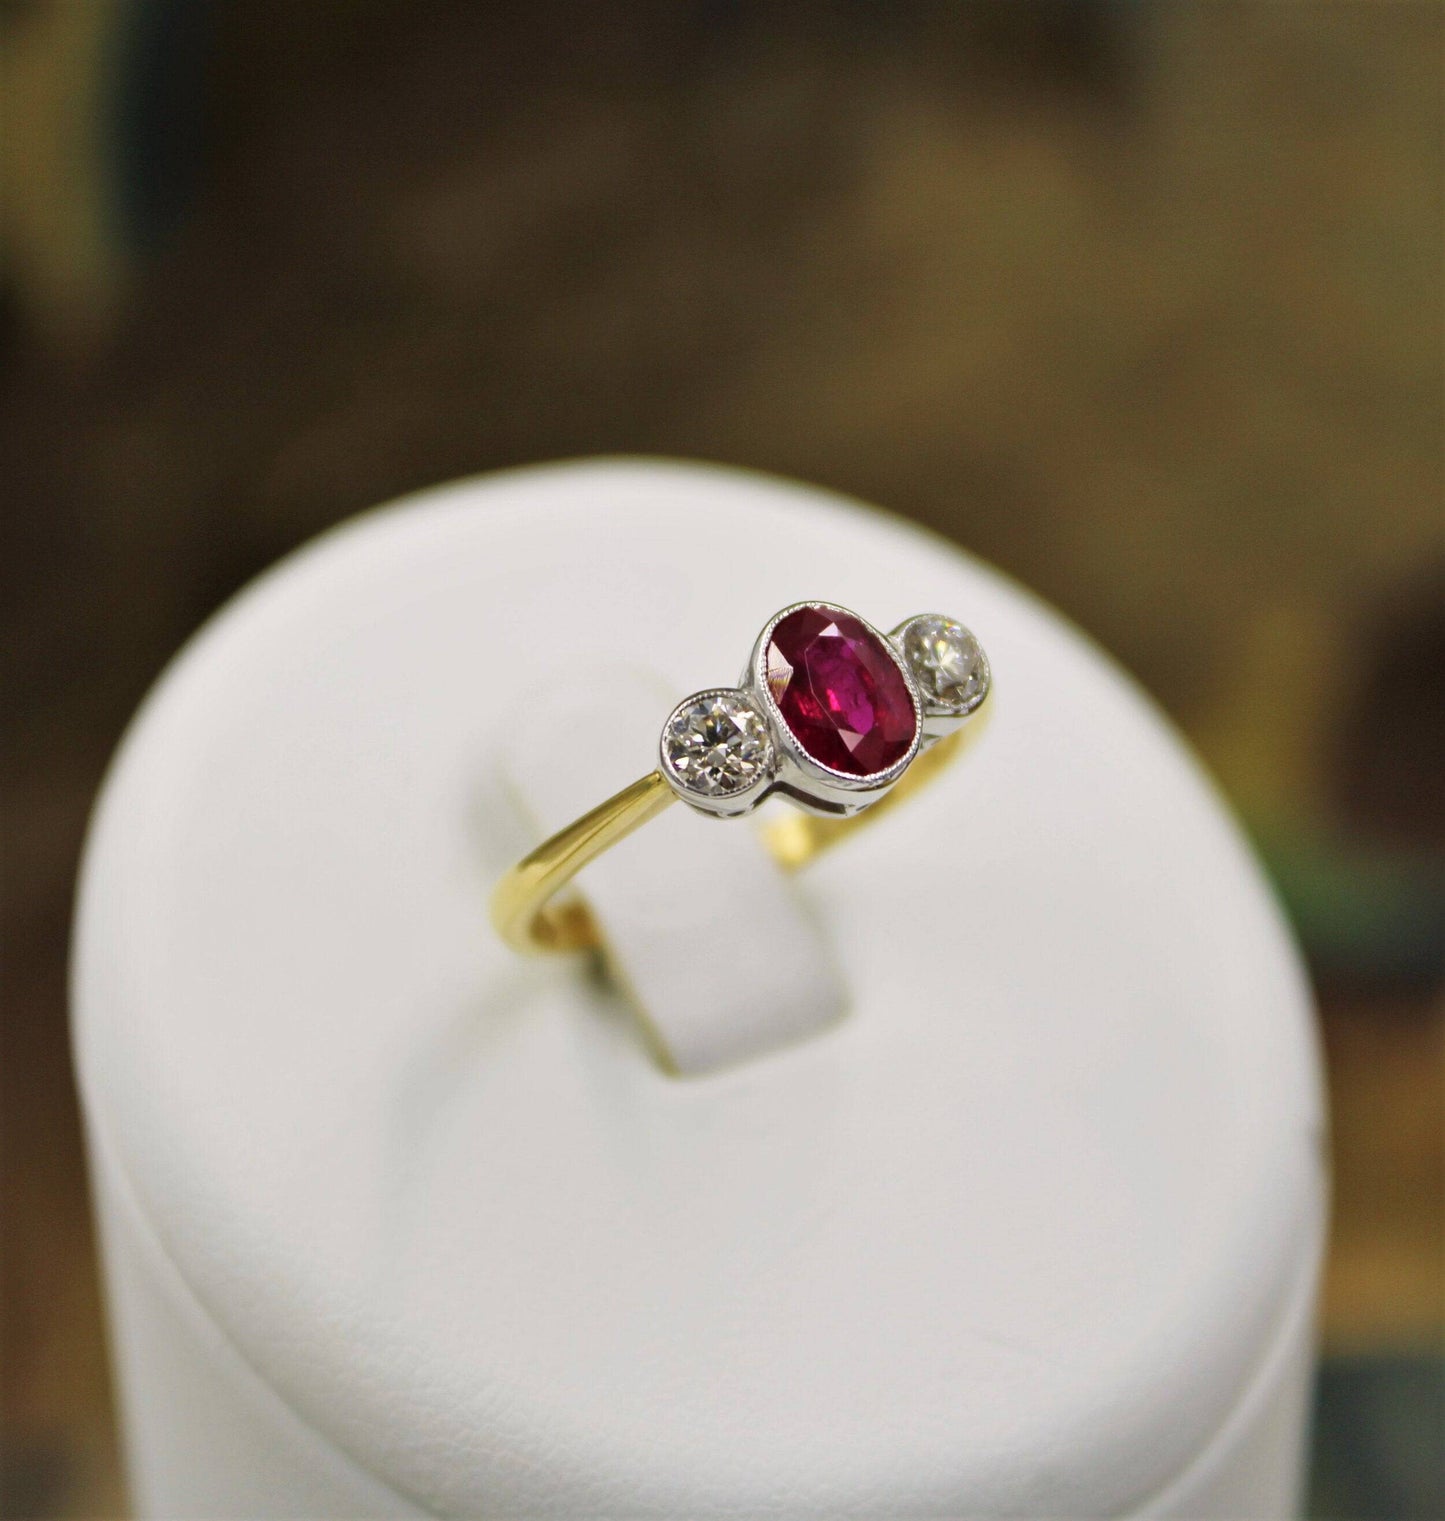 A very fine Oval Natural Ruby & Diamond Ring mounted in 18ct Yellow Gold & Platinum, Pre-owned - Robin Haydock Antiques